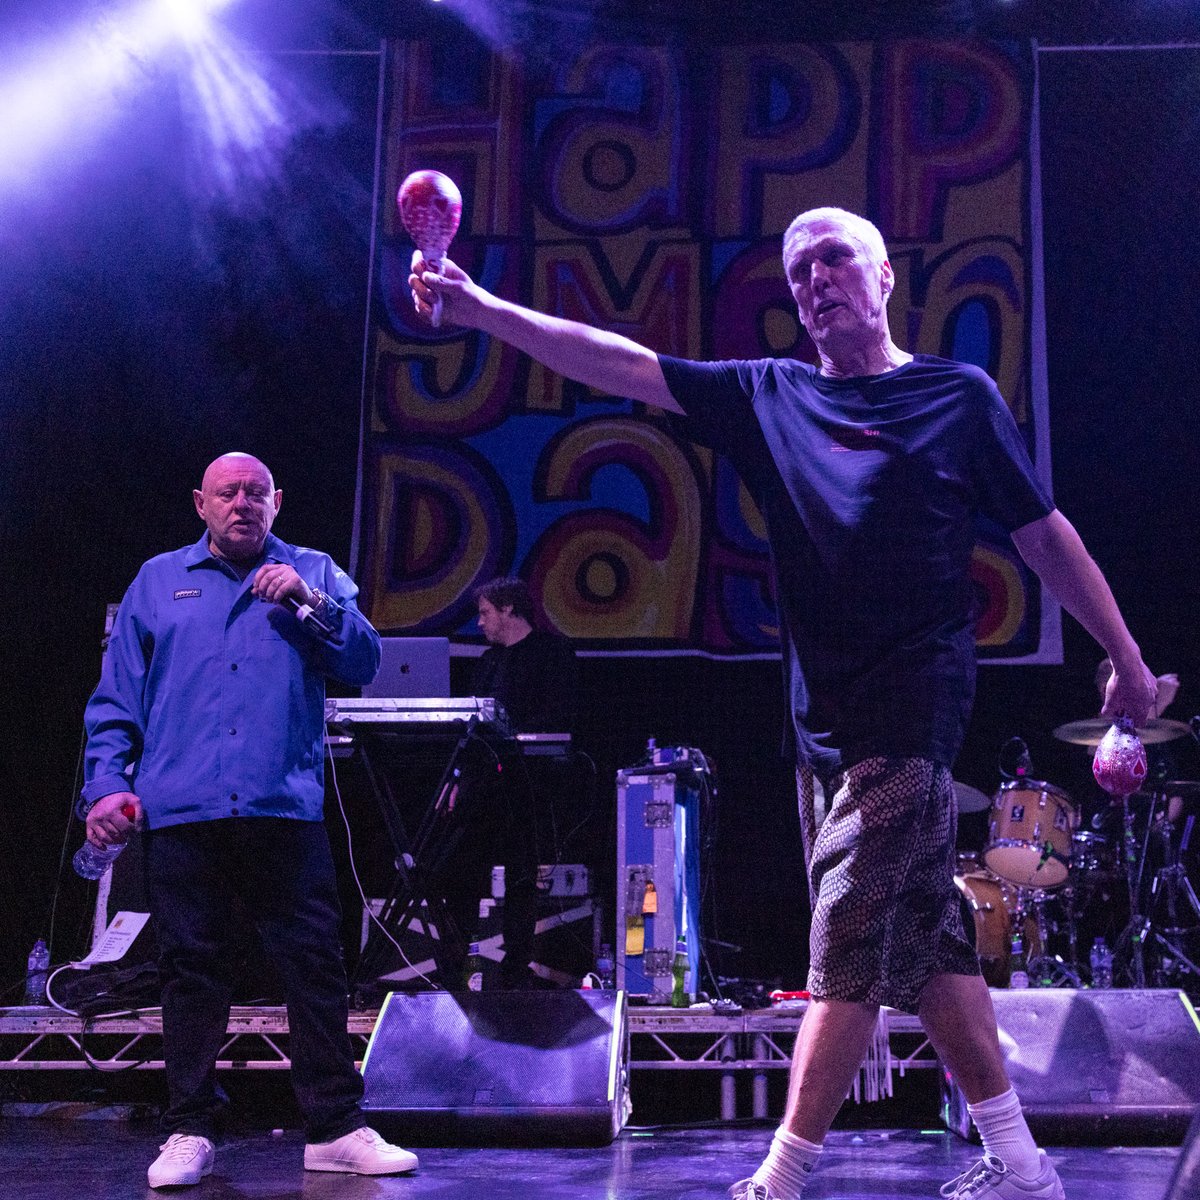 Pioneers of madchester, @Happy_Mondays put on an unforgettable show for us 🎶 The atmosphere was electric ⚡ 📸 @unholyracket for @academyamg (𝘱𝘭𝘦𝘢𝘴𝘦 𝘥𝘰 𝘯𝘰𝘵 𝘶𝘴𝘦 𝘸𝘪𝘵𝘩𝘰𝘶𝘵 𝘱𝘦𝘳𝘮𝘪𝘴𝘴𝘪𝘰𝘯) #HappyMondays O2 Academy Leeds - Friday 29 March 2024